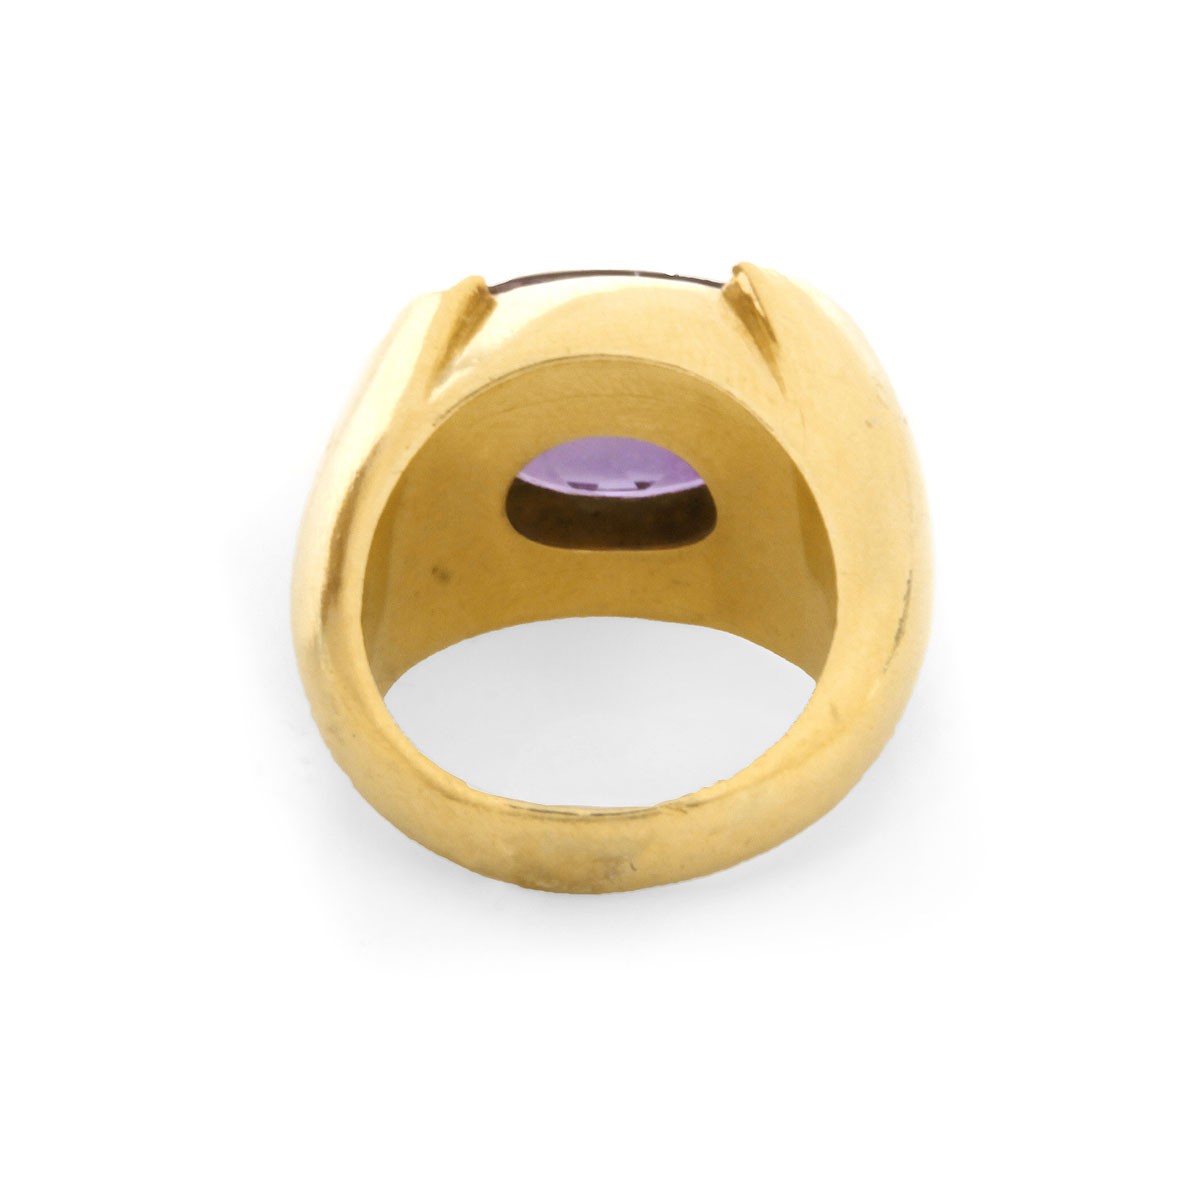 Vintage Amethyst and 18K Ring